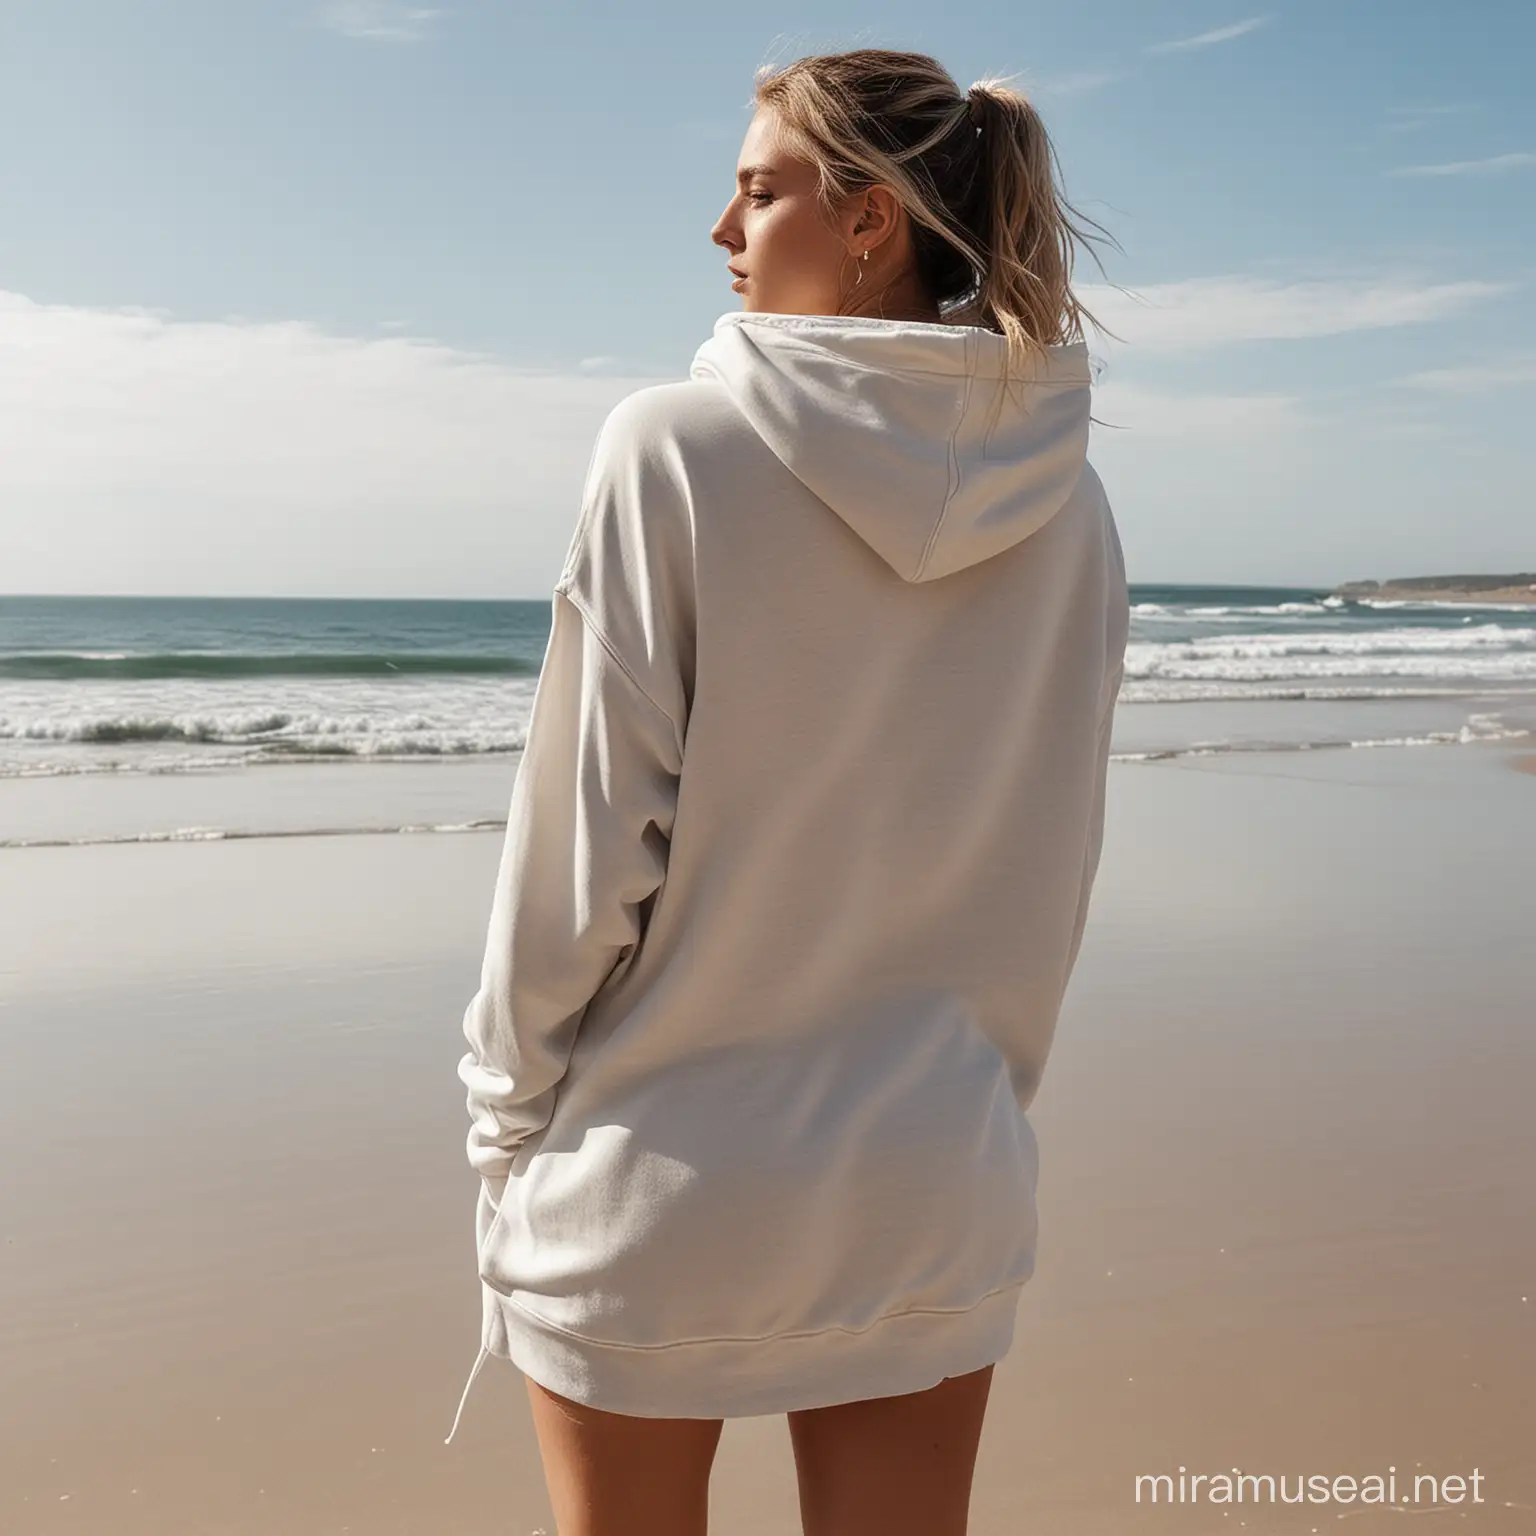 woman at the beach wearing a oversized trendy hoodie, back facing camera, full body, no creases on the back of the hoodie

